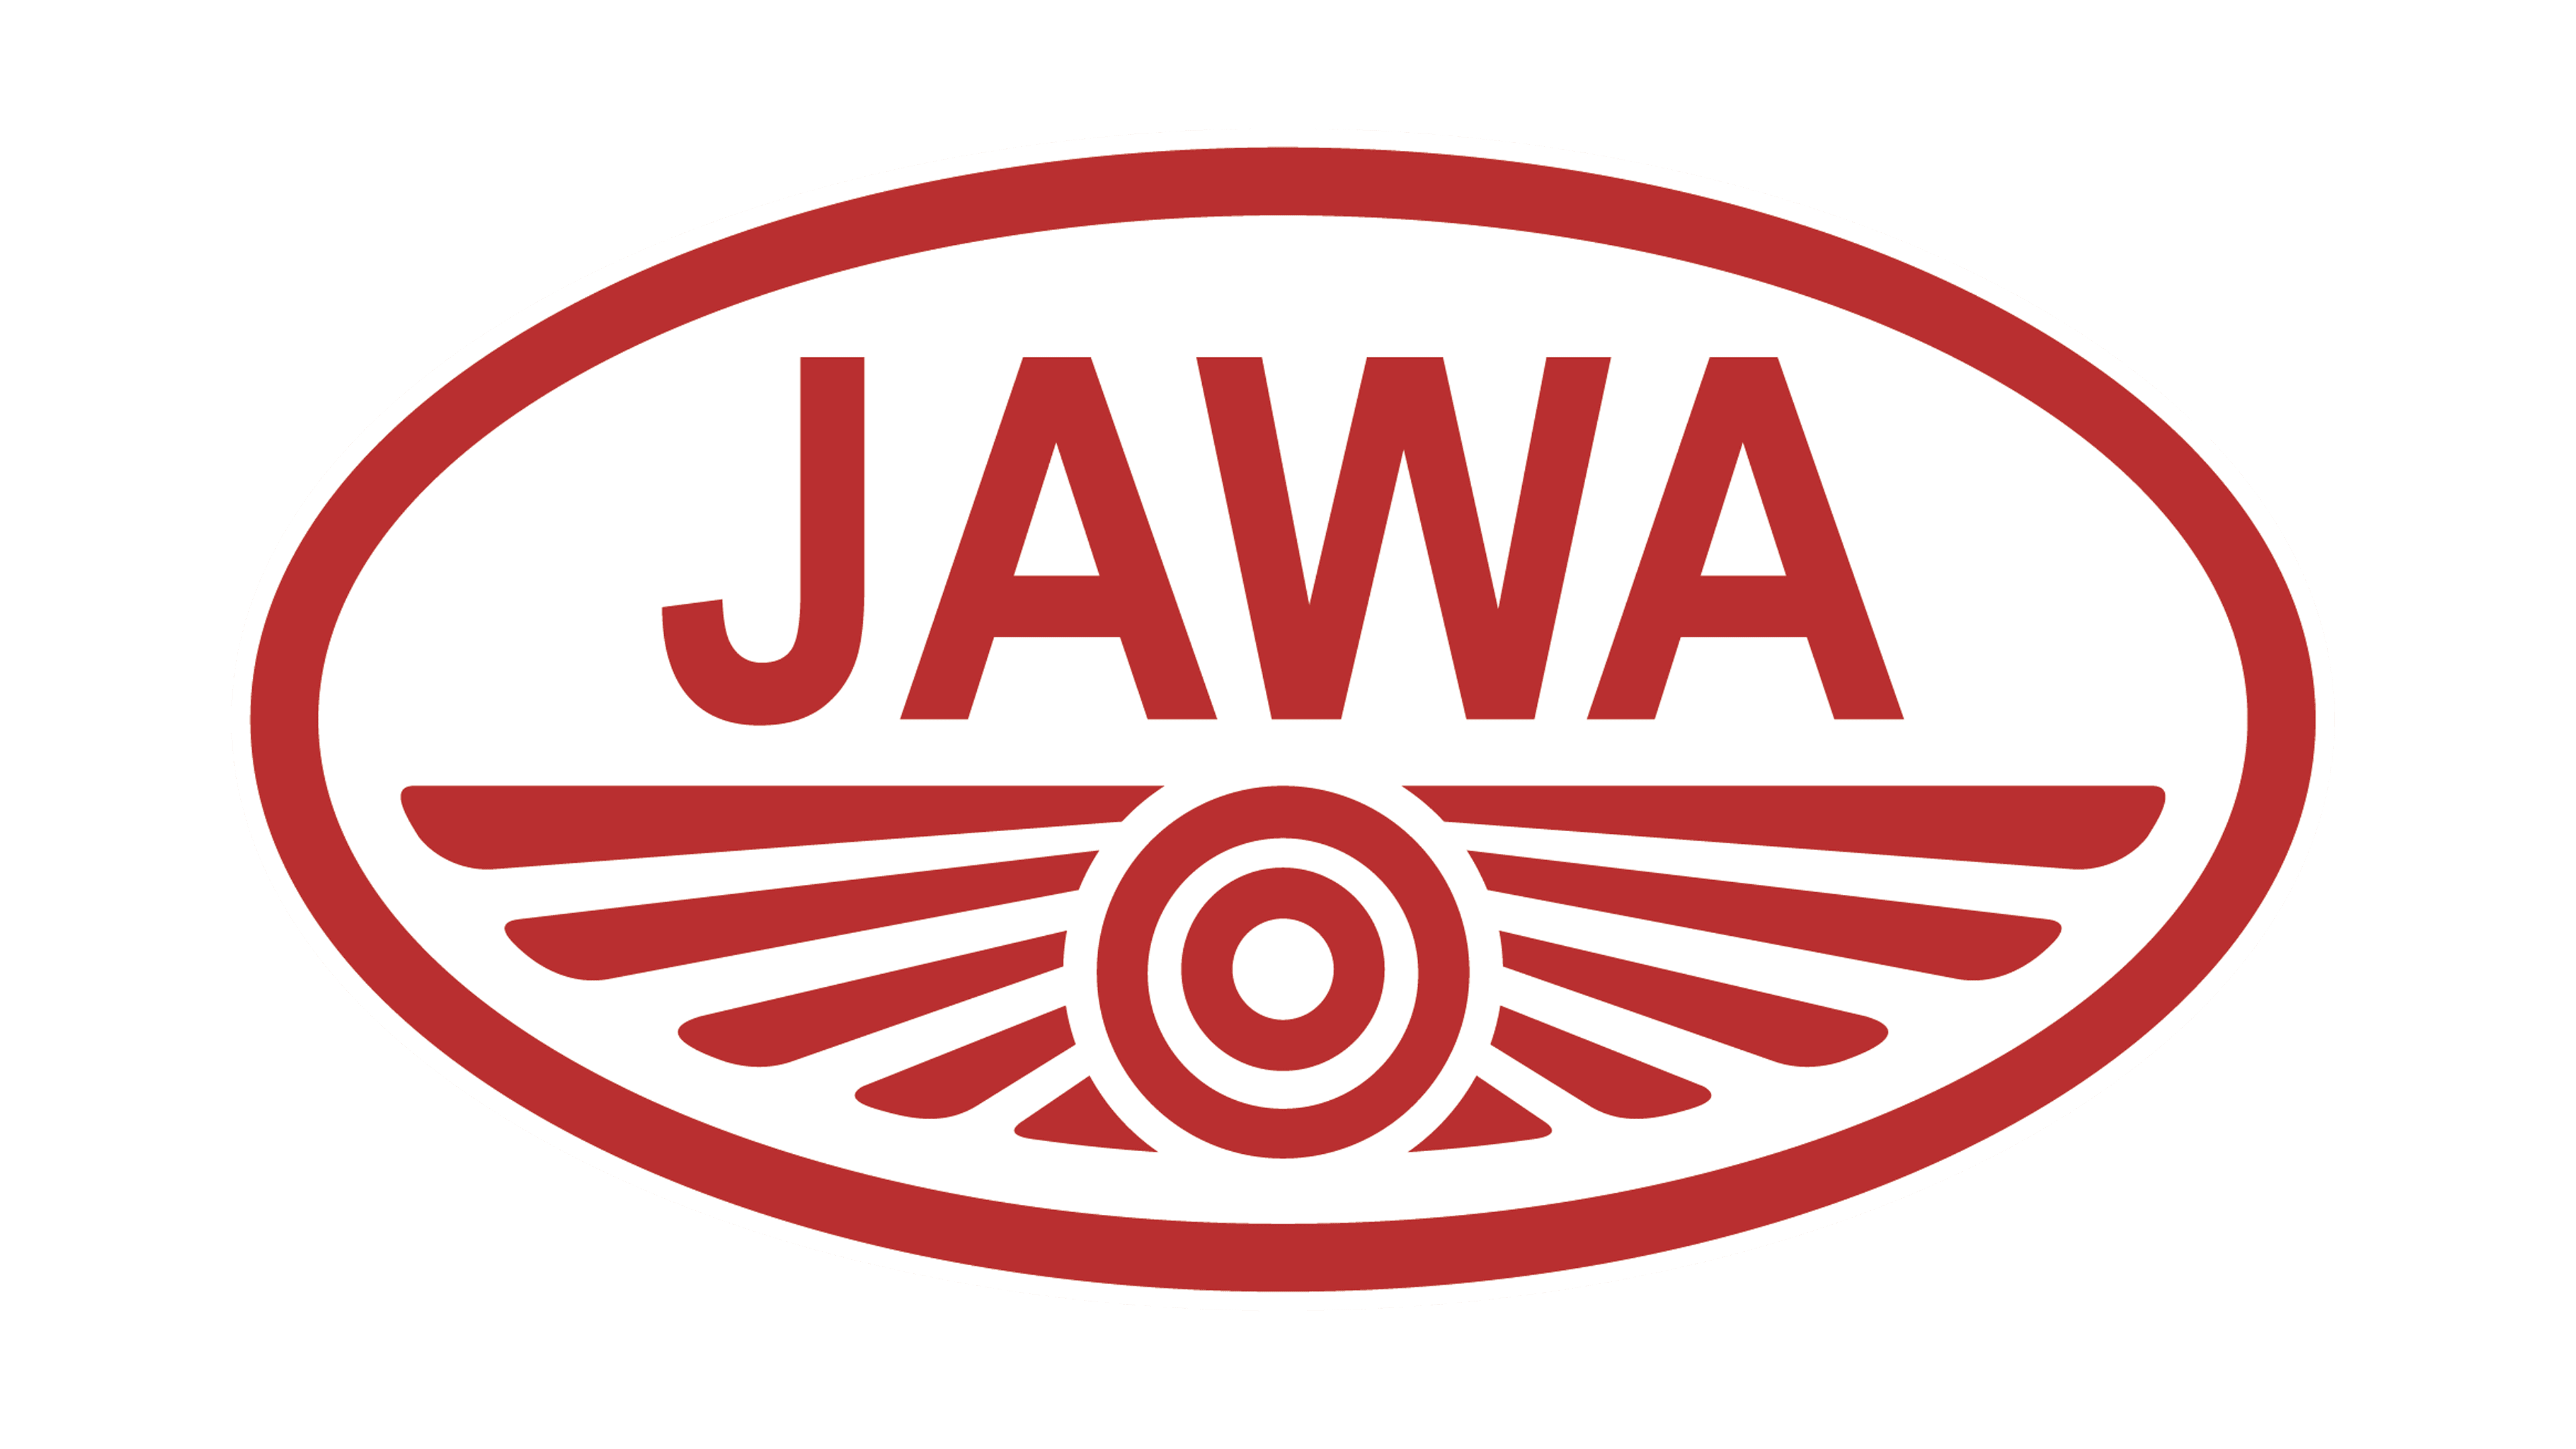 2021 Jawa 42 Launched In India - Top 5 Changes